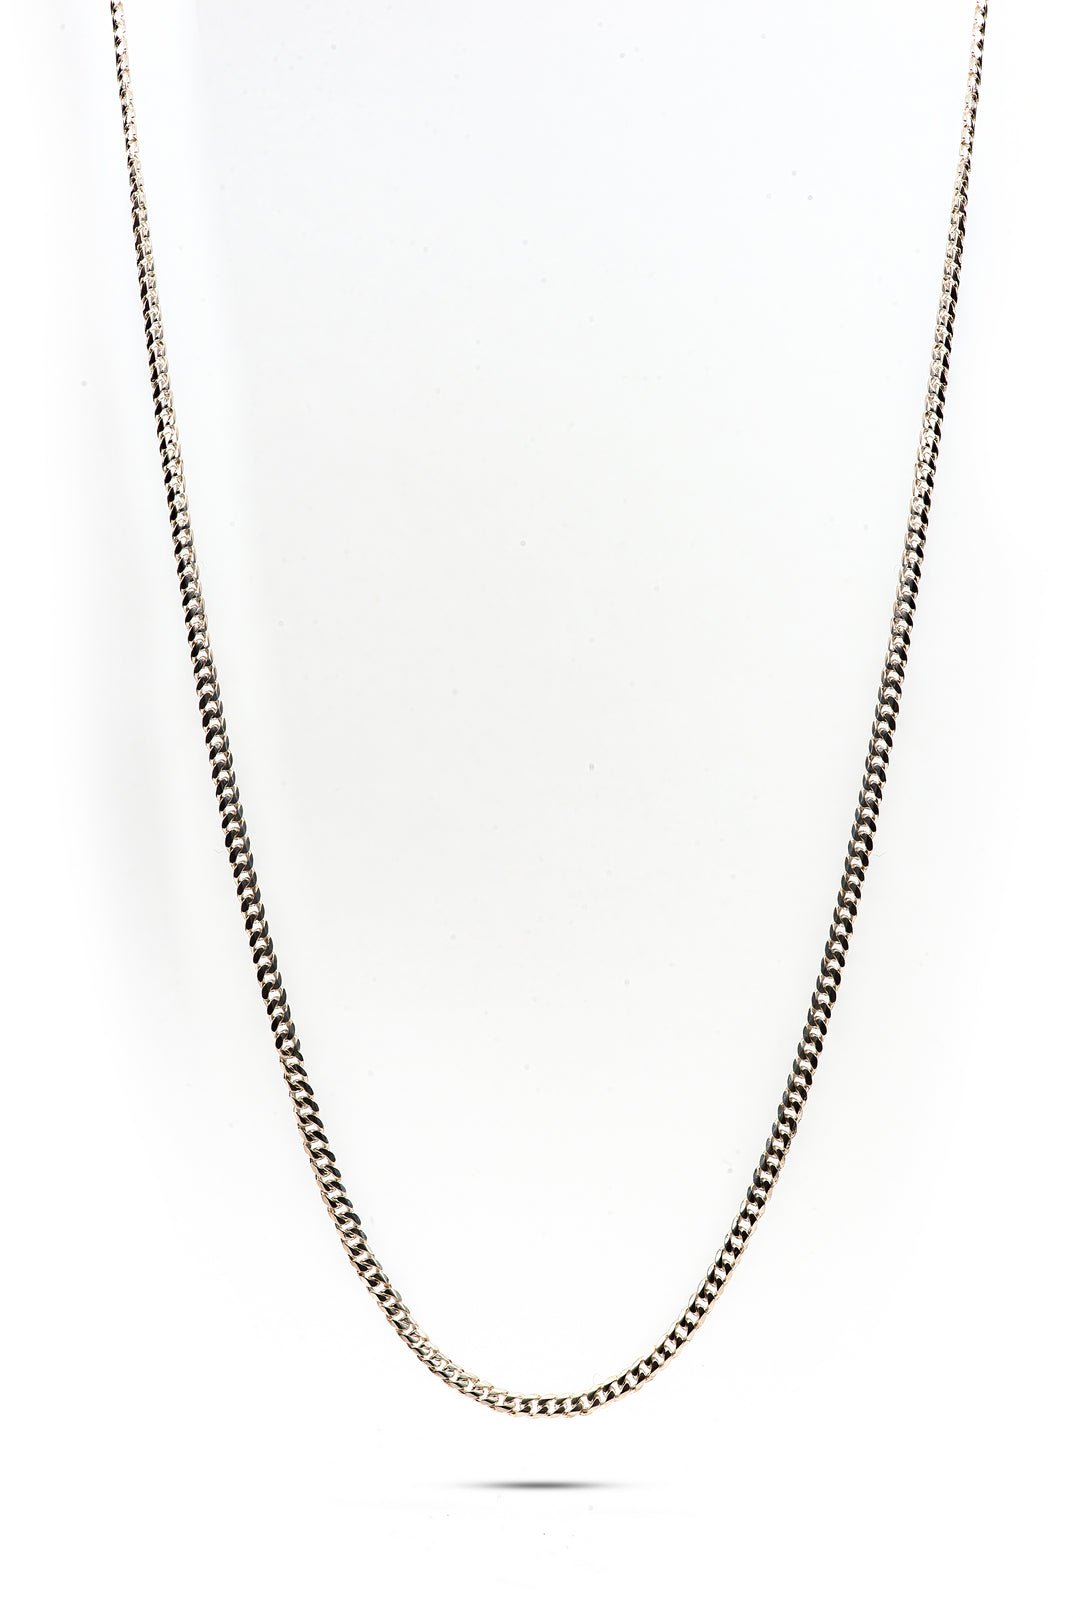 Strong Hold 28-Inch Sterling Silver Chain for Men